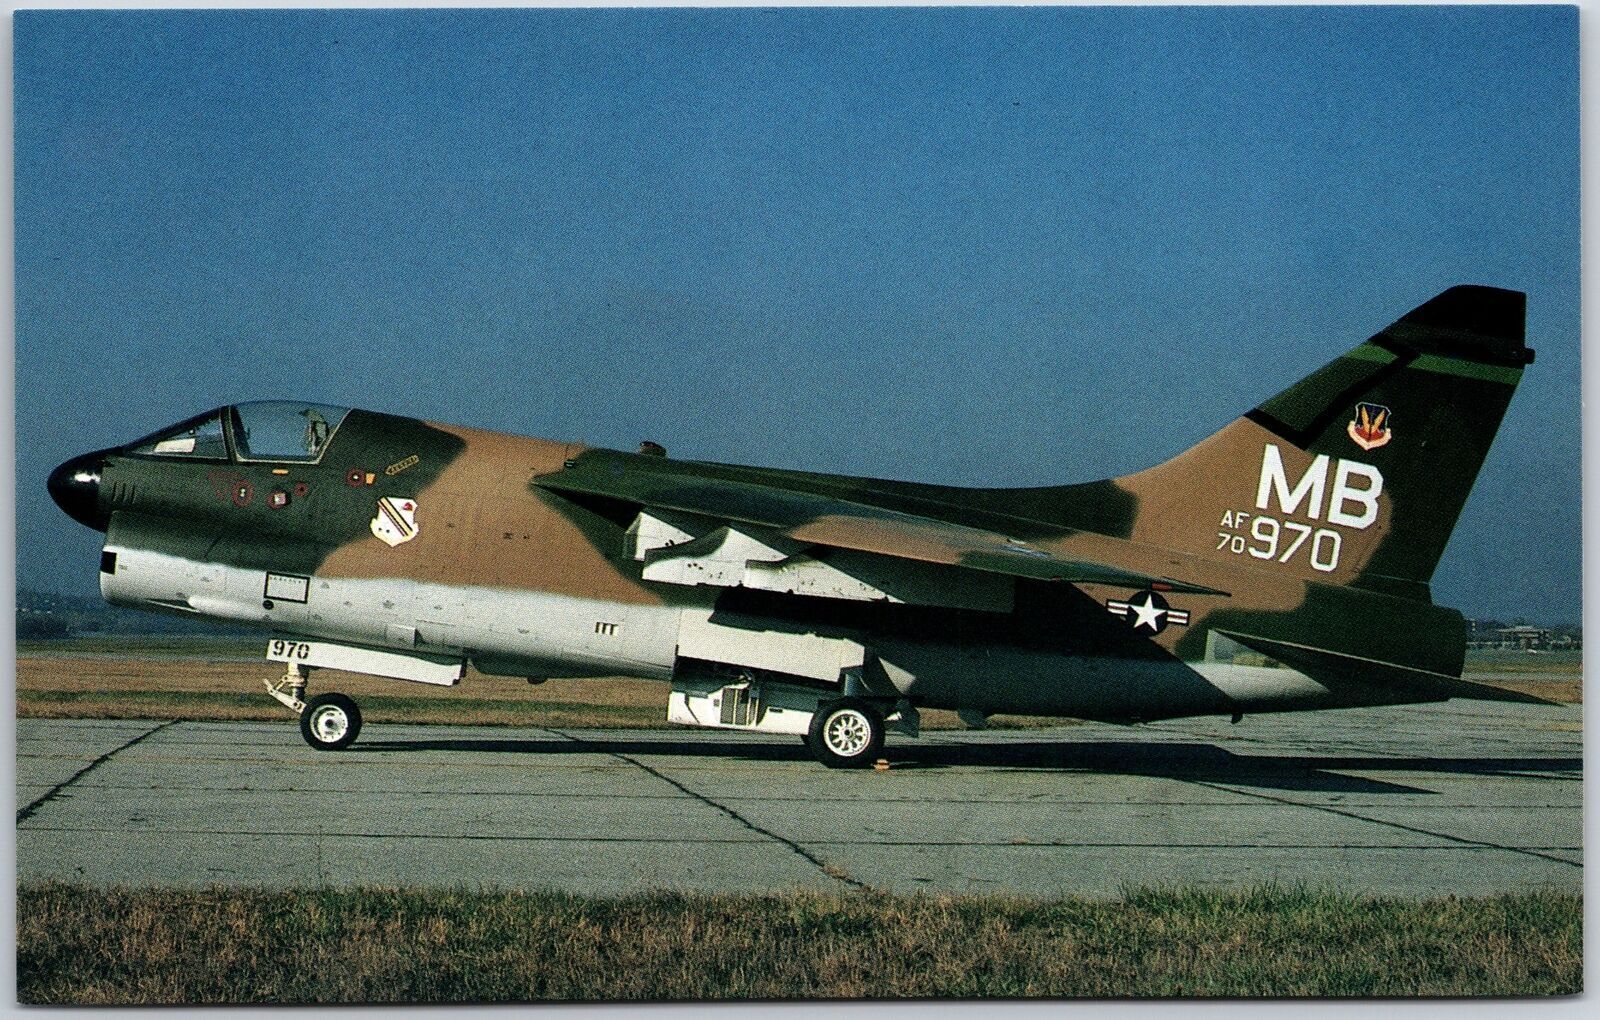 Airplane LTV (Vought) A-7D Corsair II Aircraft at USAF Museum Military Postcard